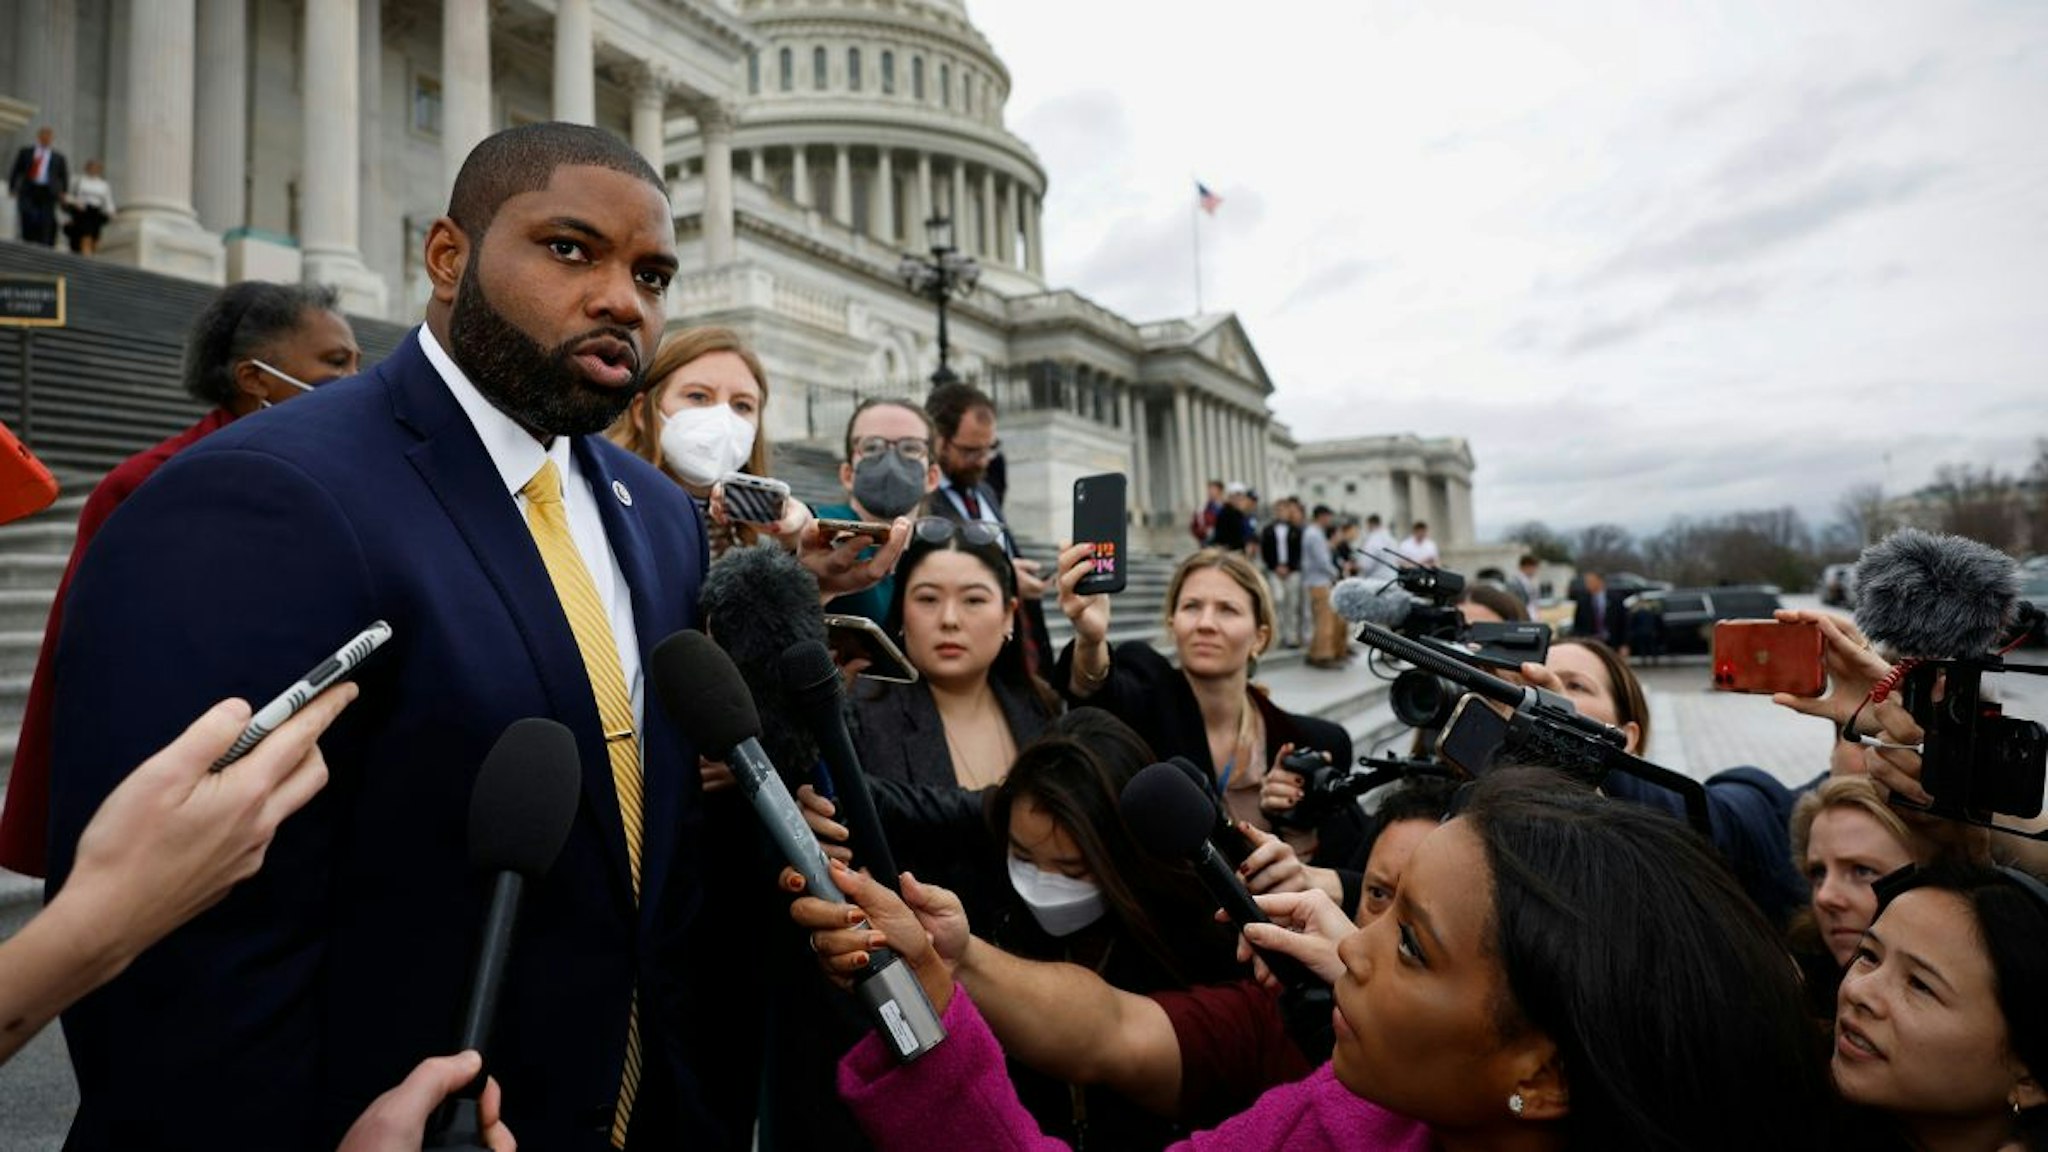 U.S. Rep.- elect Byron Donalds (R-FL) speaks to the media during the second day of elections for Speaker of the House outside the U.S. Capitol Building on January 04, 2023 in Washington, DC.